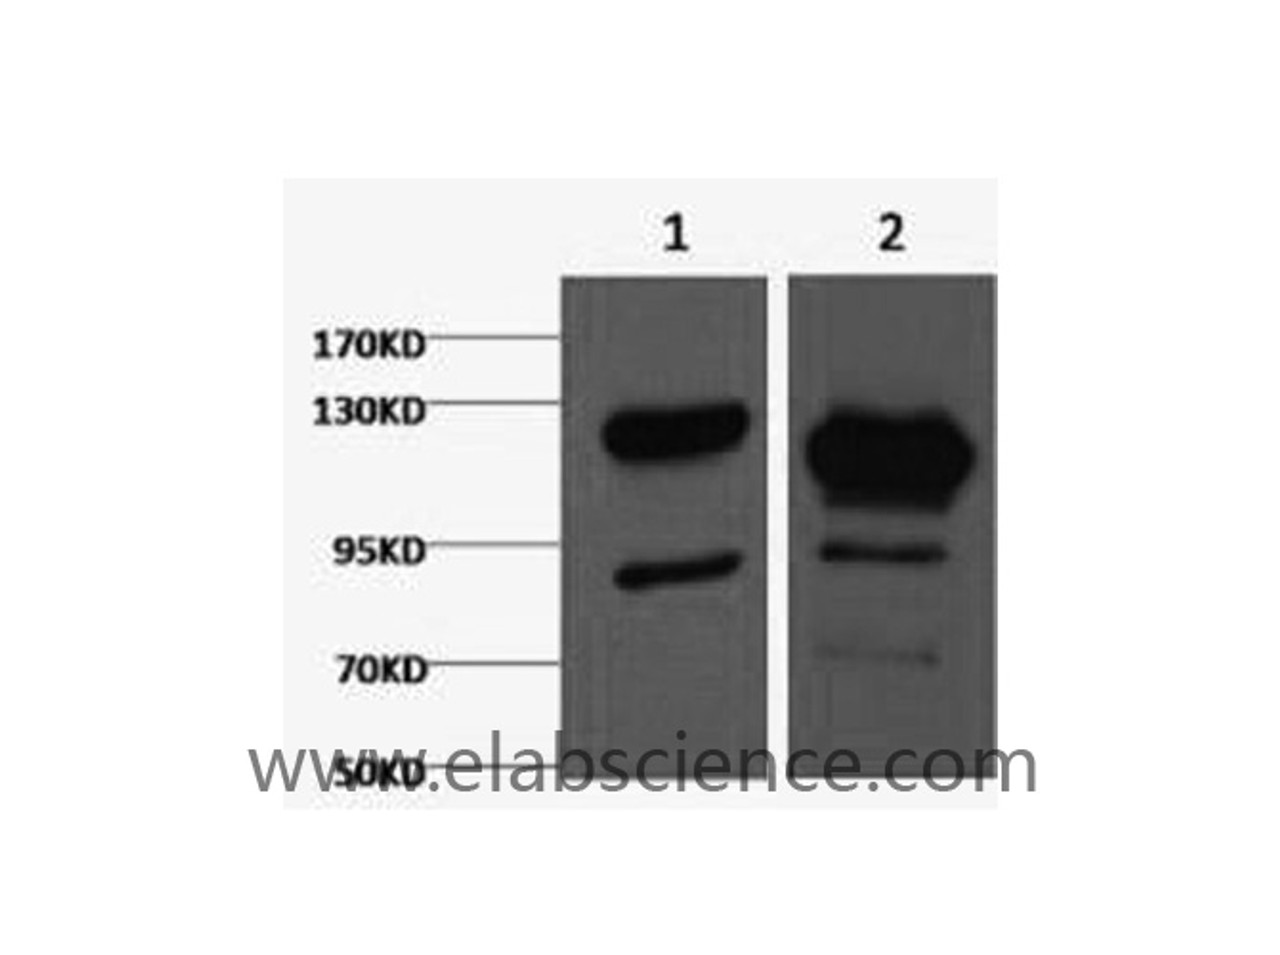 Western Blot analysis of 1) Jurkat, 2) Hela cells using Cleaved PARP1 Monoclonal Antibody at dilution of 1:2000.